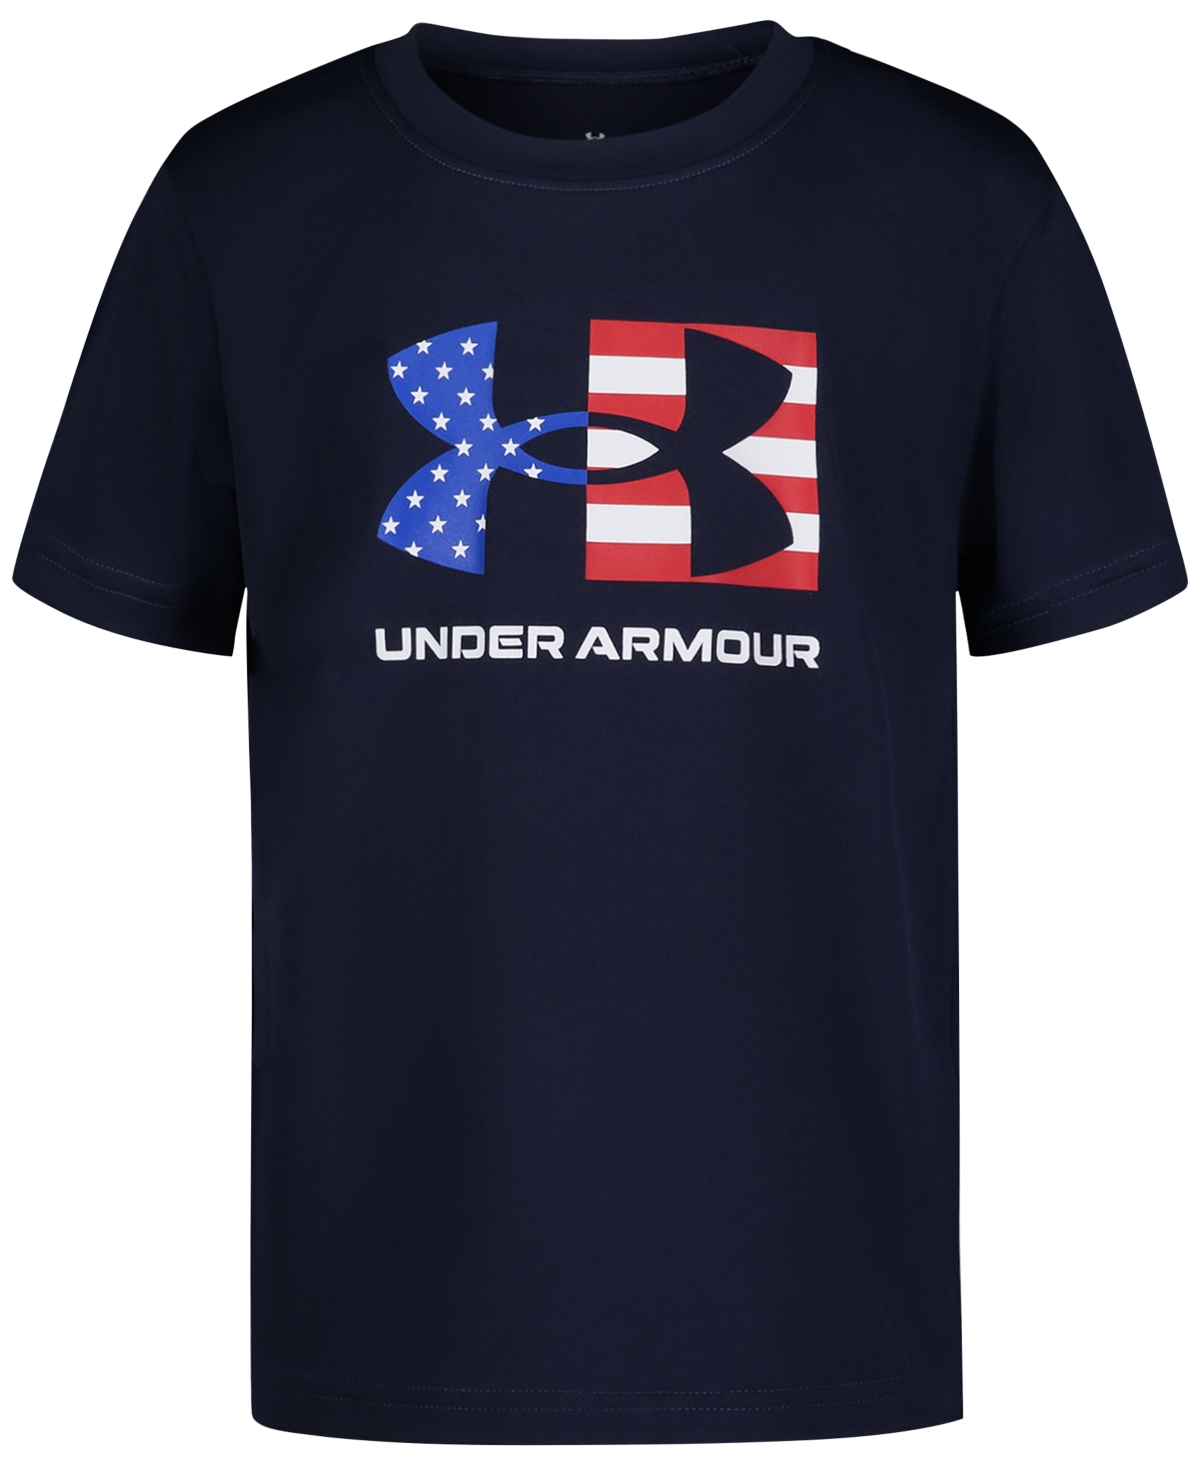 Under Armour Kids' Toddler & Little Boys Ua Freedom Flag Graphic T-shirt In Midnight Navy